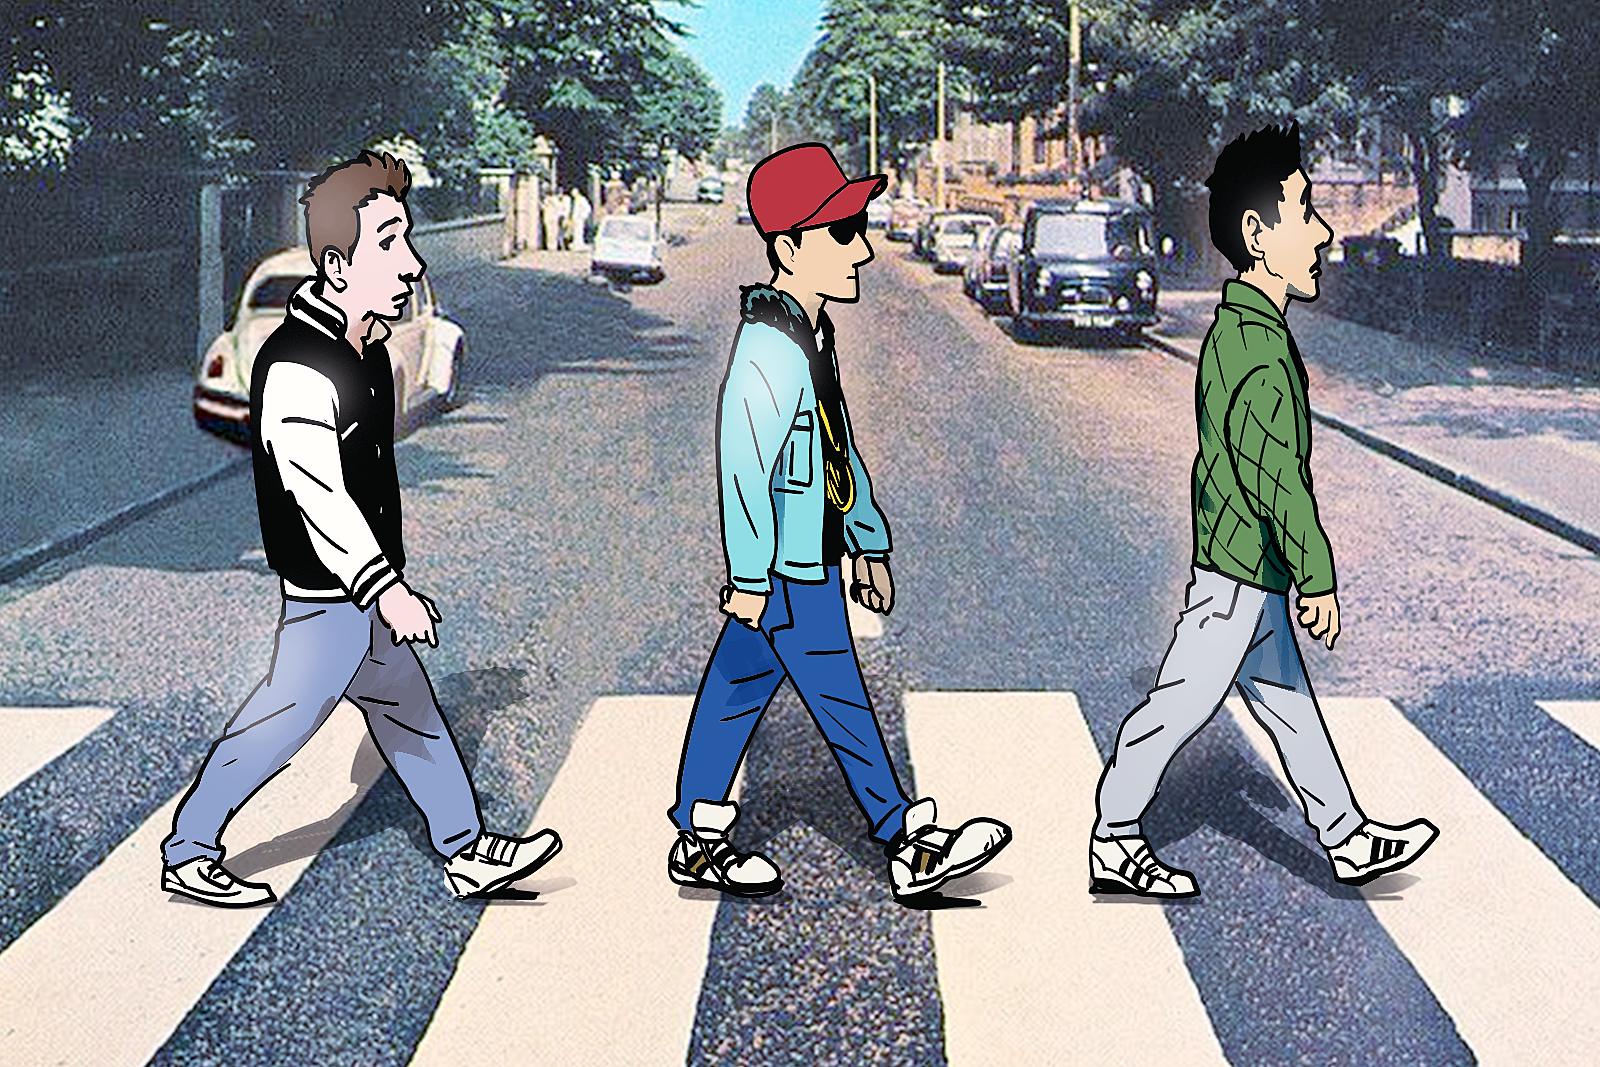 The Kooky Symbolism on the Beatles' 'Abbey Road' Album Cover